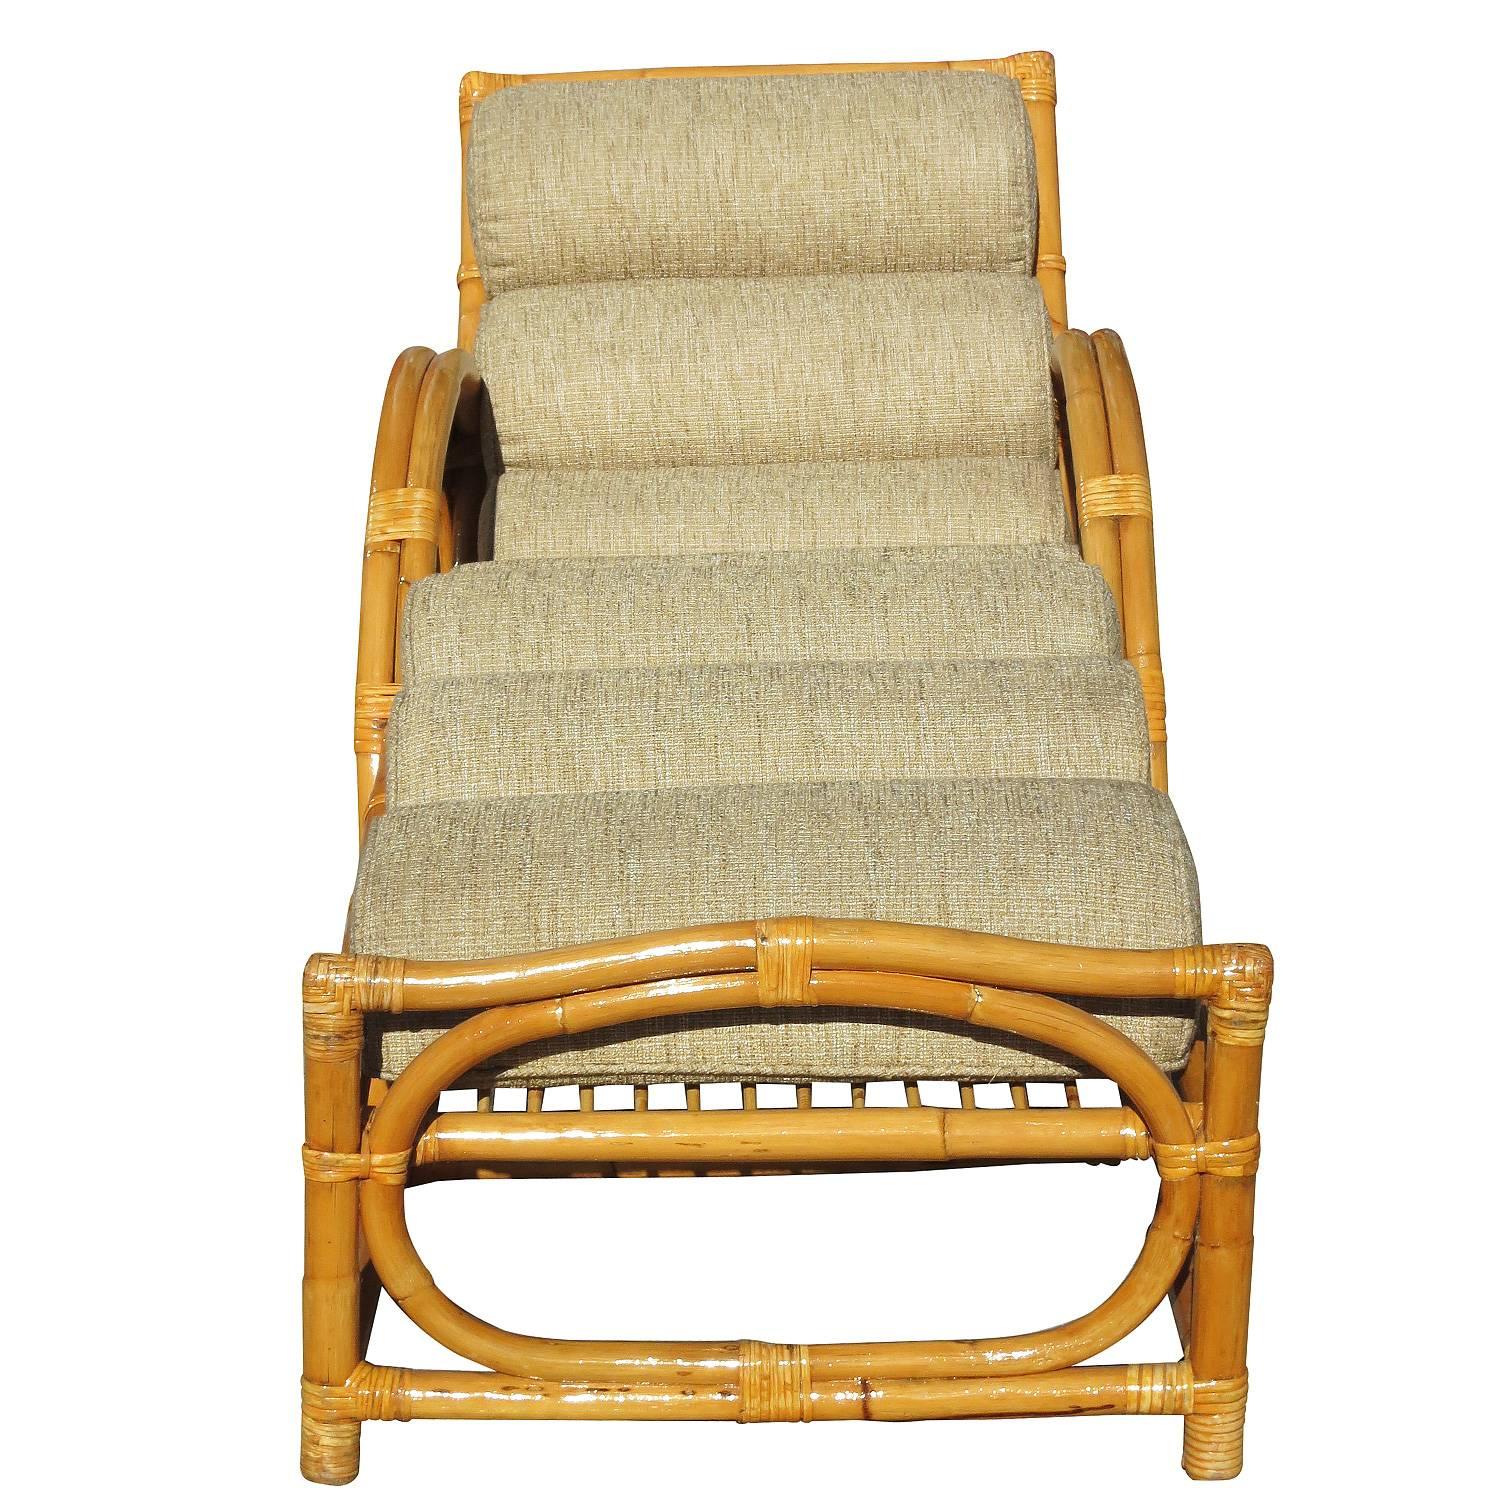 Rattan chaise lounge with what we at the shop call the Circles and Speed Arm, two strand side arms. Inspired by Paul Frankl this lounge is one of the rarest of all designs. The workmanship is superior to most rattan out there and this can easily be